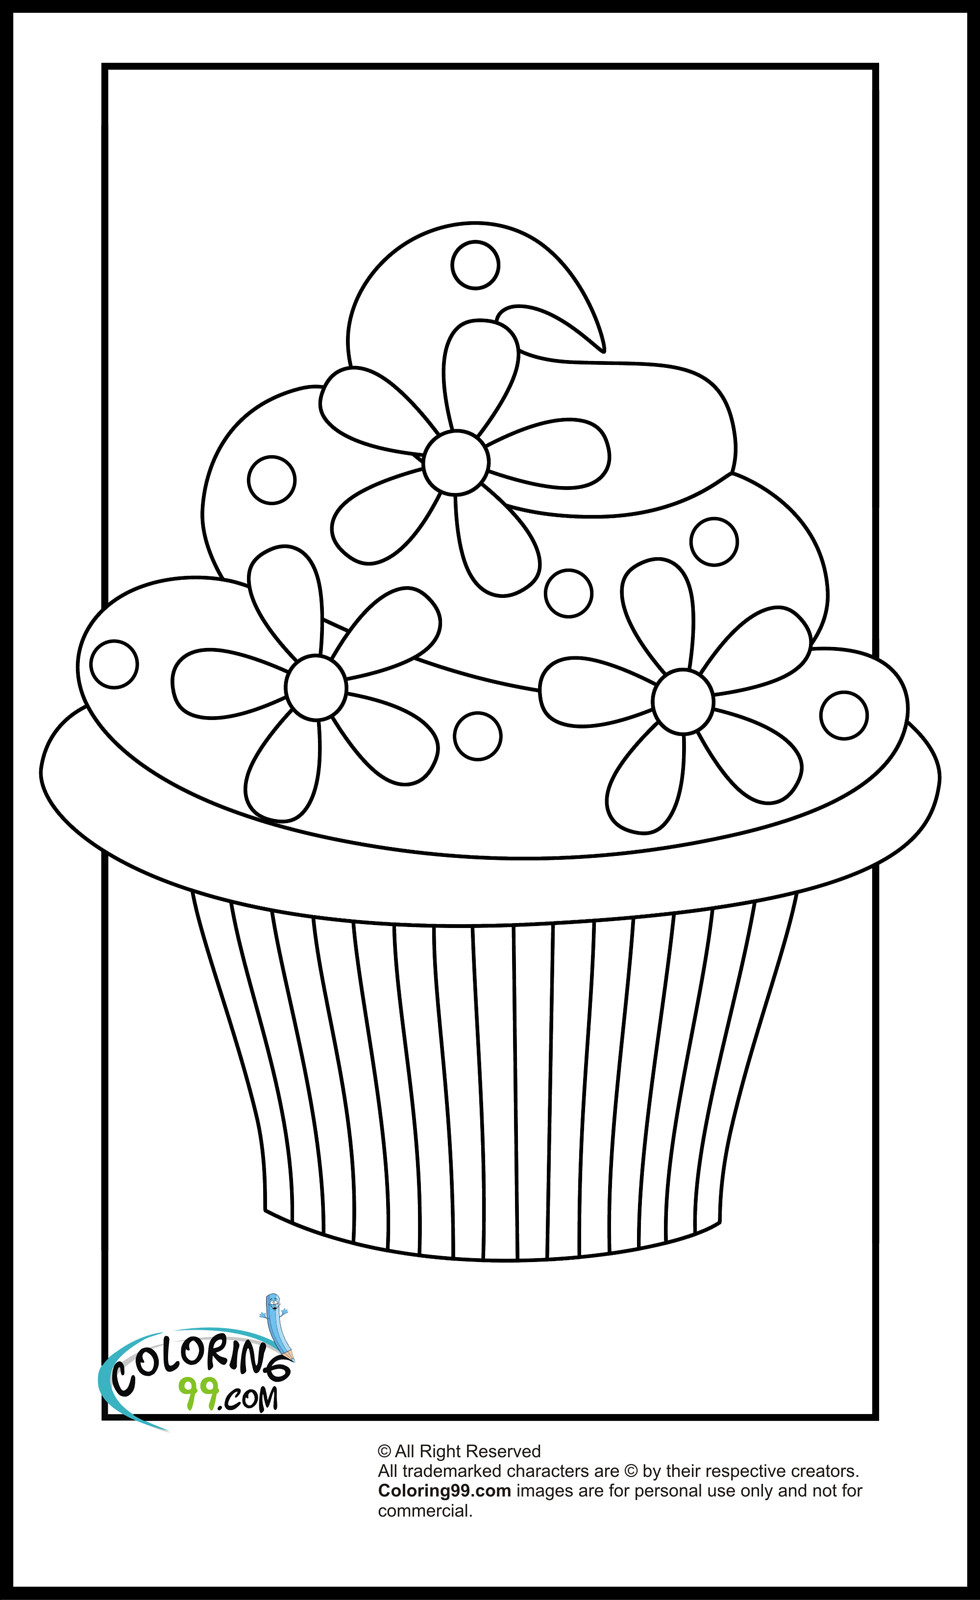 Cupcake Printable Coloring Pages
 Cupcake Coloring Pages